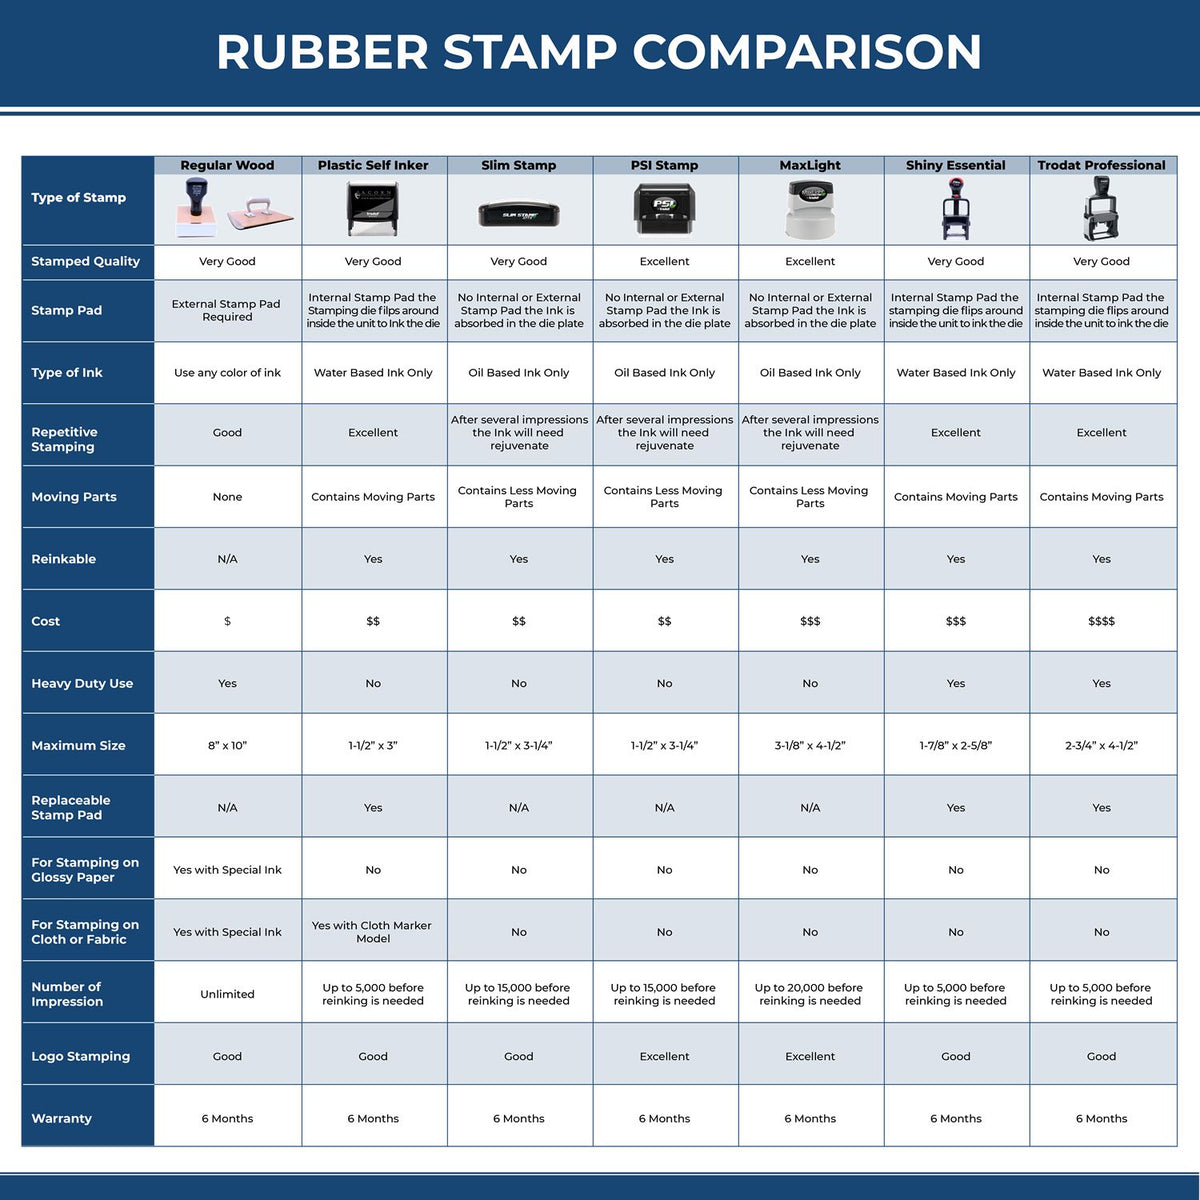 A comparison chart for the different types of mount models available for the Kentucky Professional Engineer Seal Stamp.